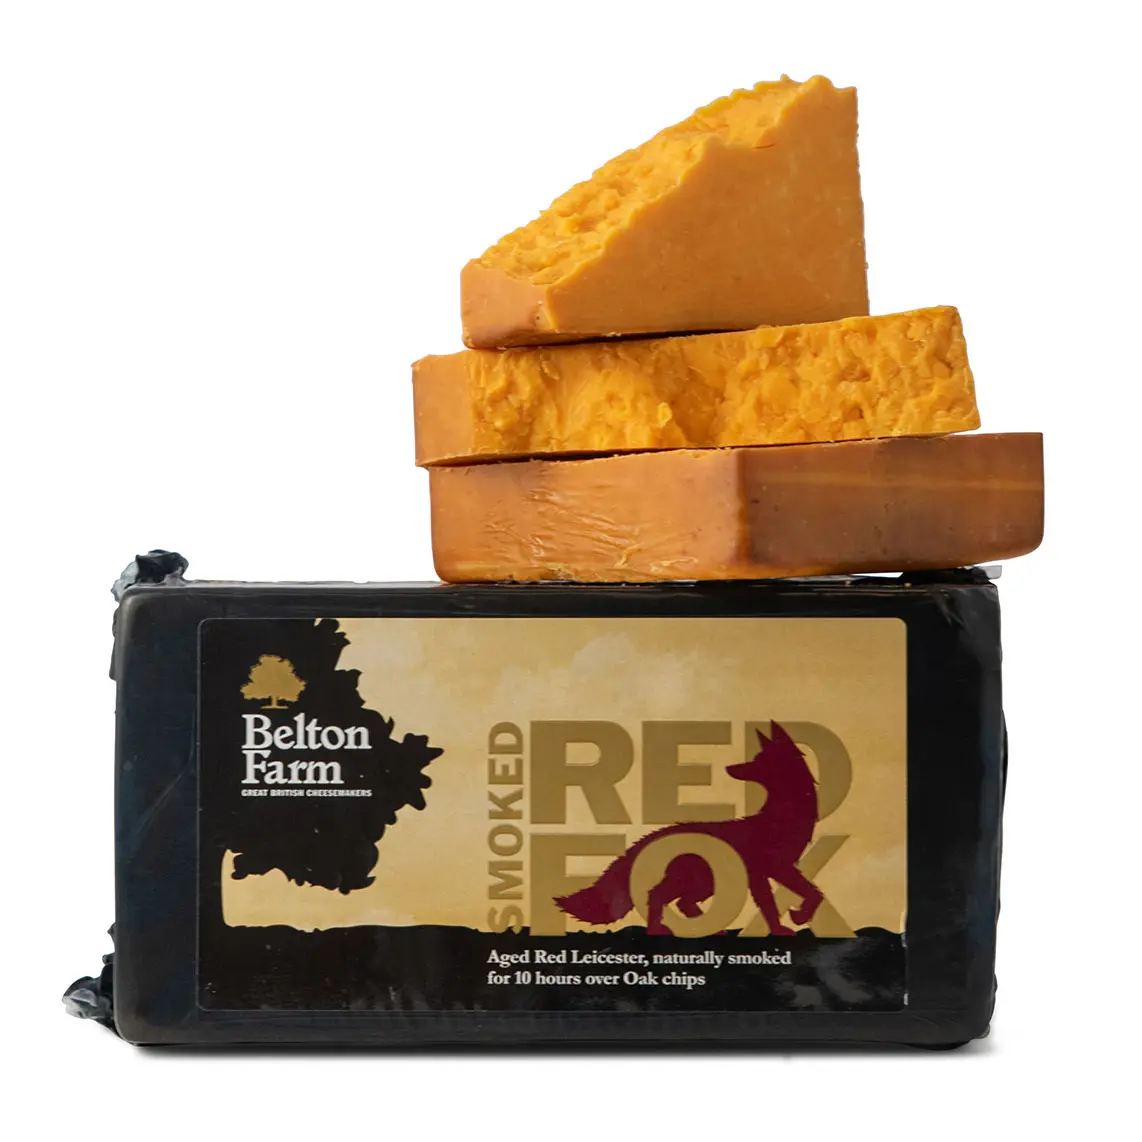 smoked red fox - What is Belton cheese